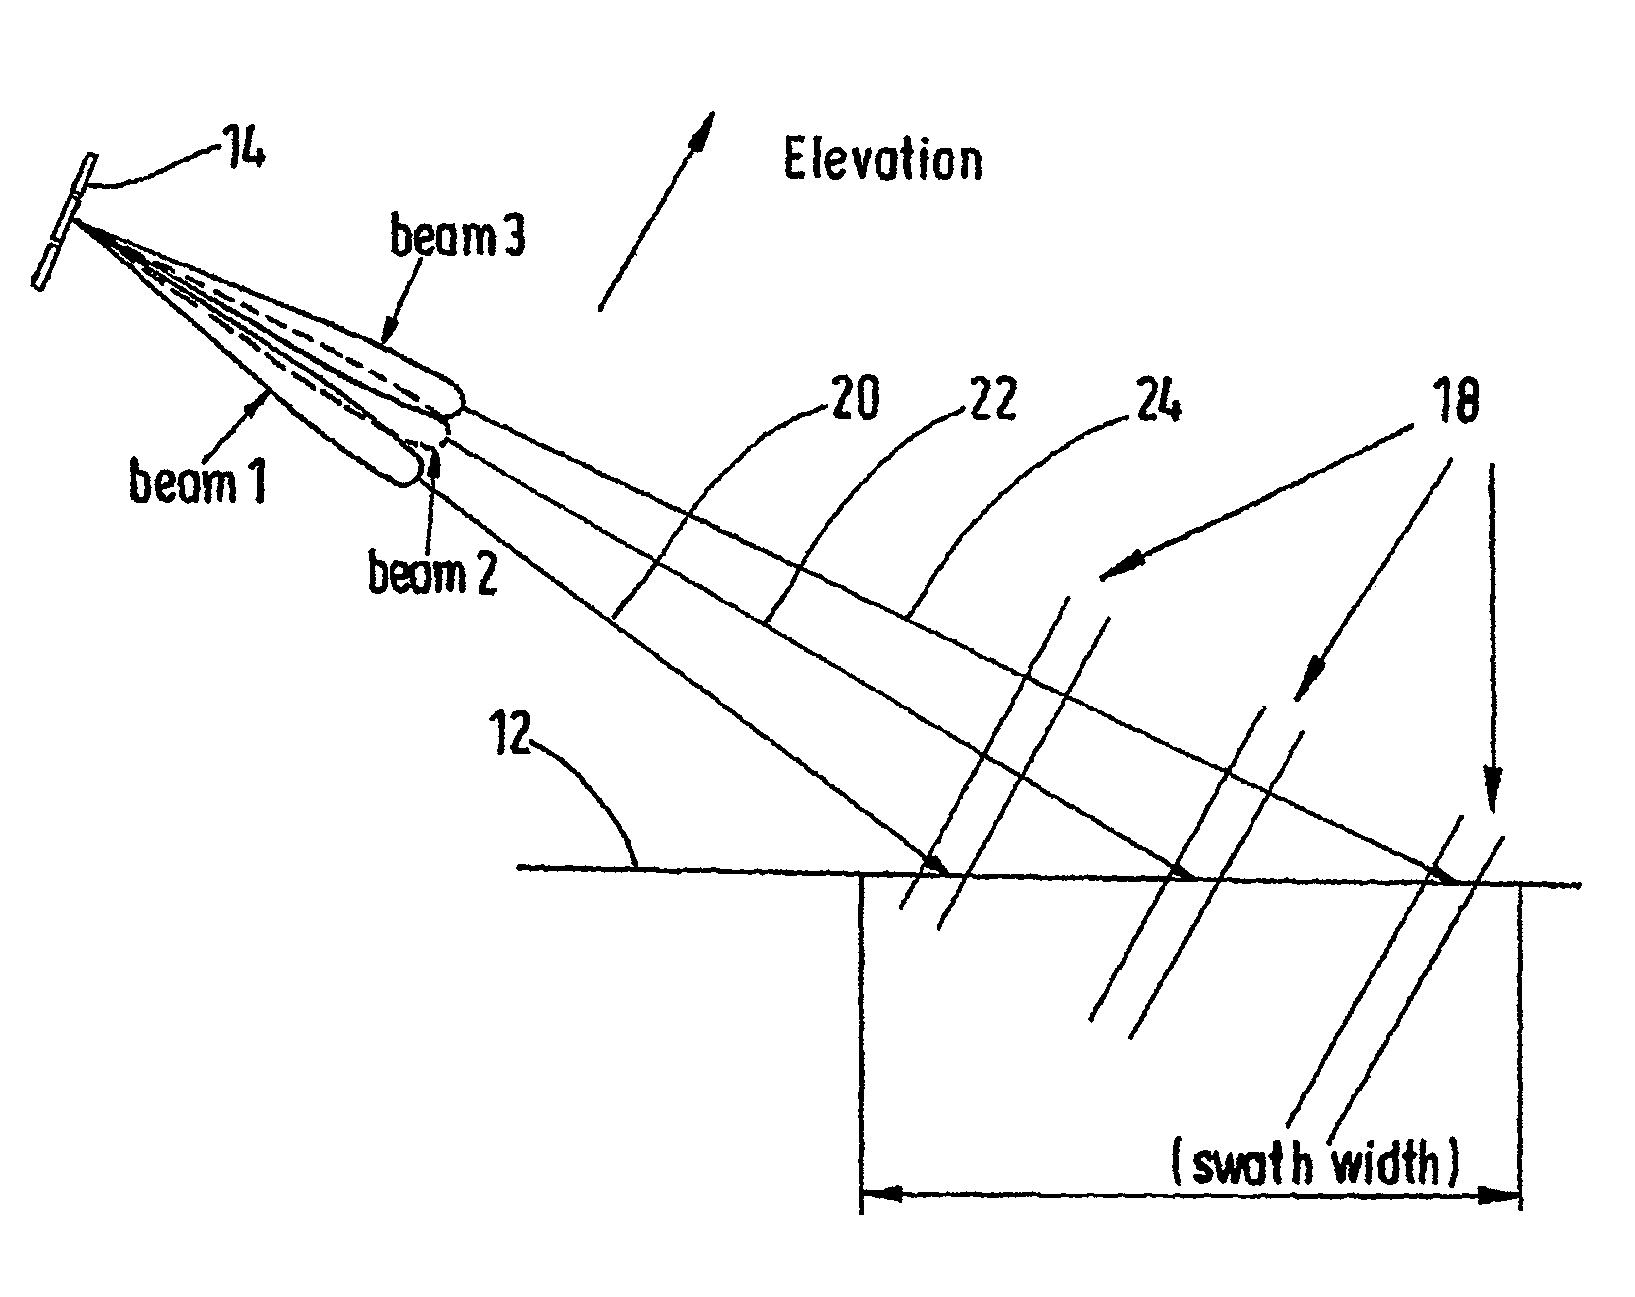 High-resolution synthetic aperture radar device and antenna for one such radar